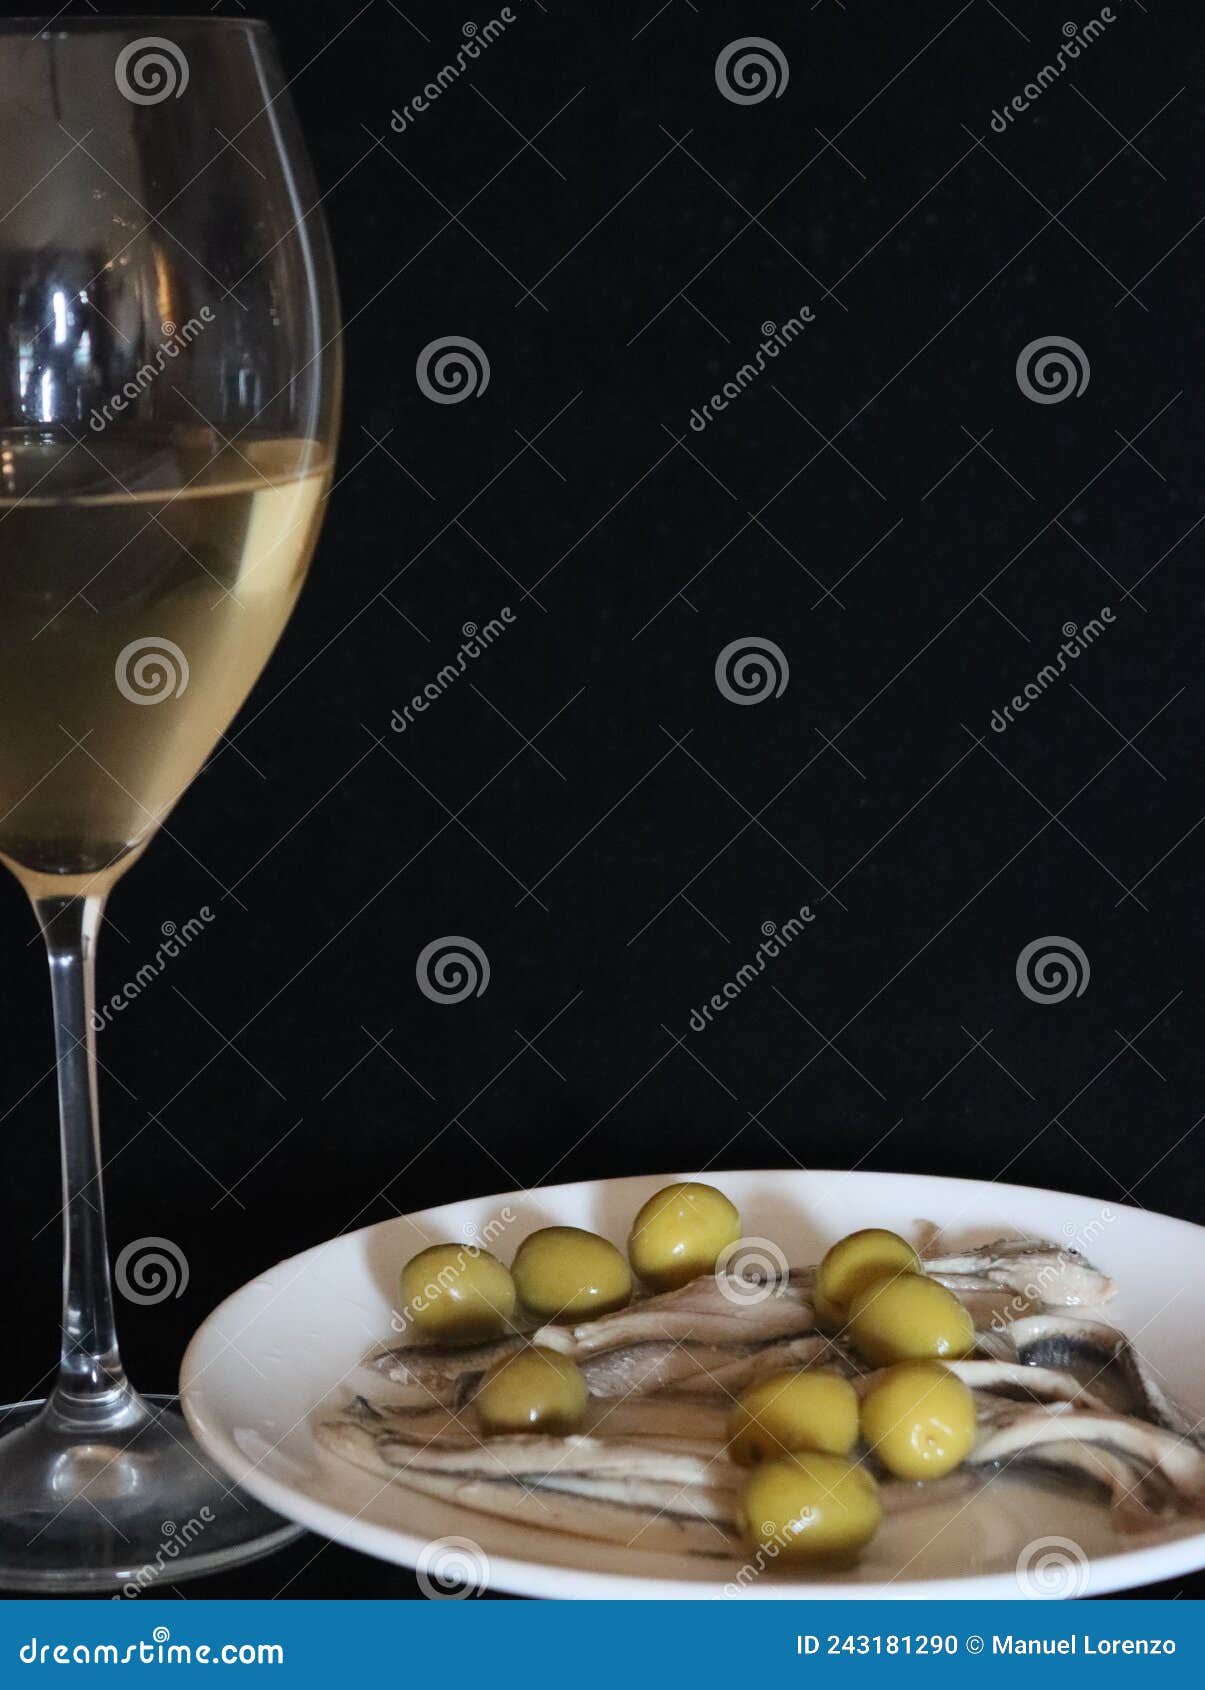 aperitif white wine olives anchovies food drink glass